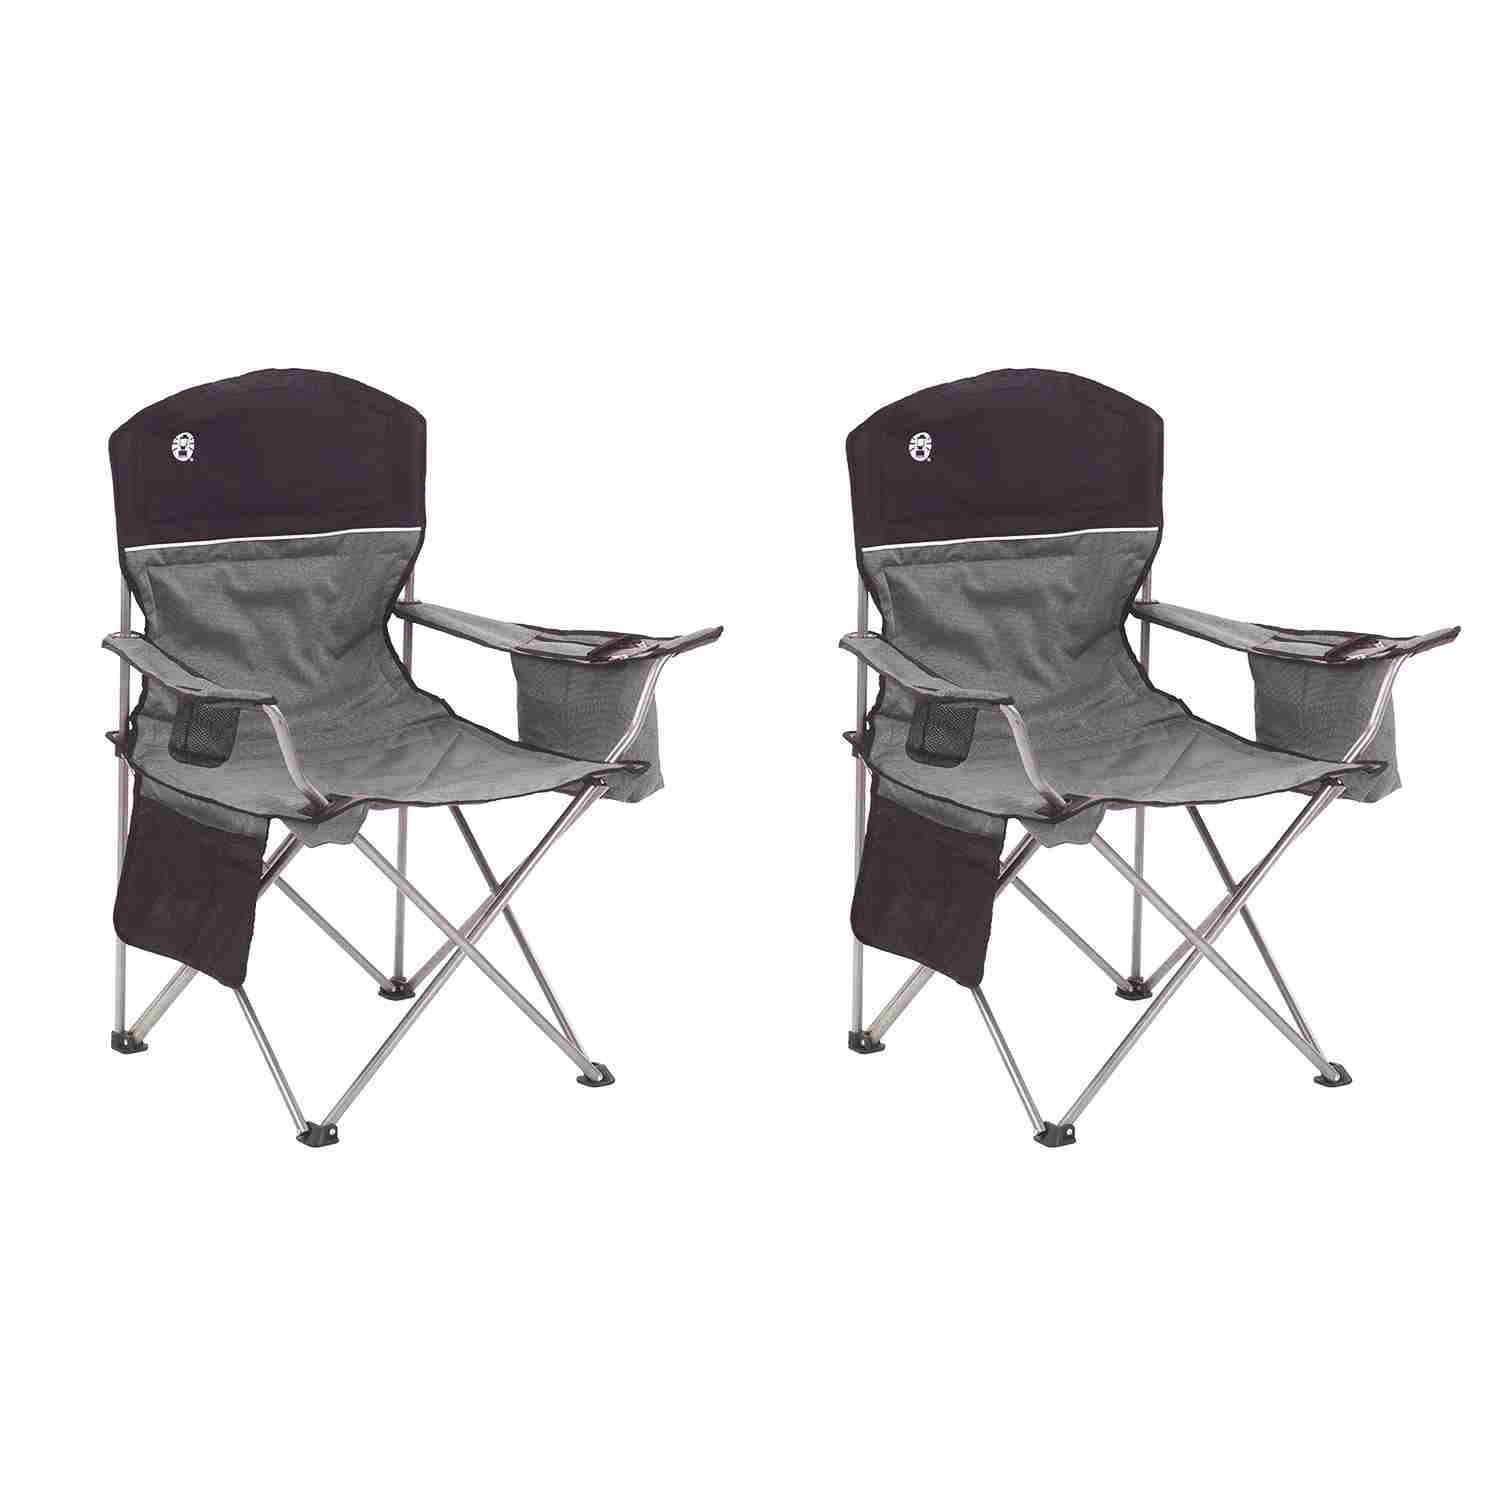 coleman-maccabee-camping-chairs